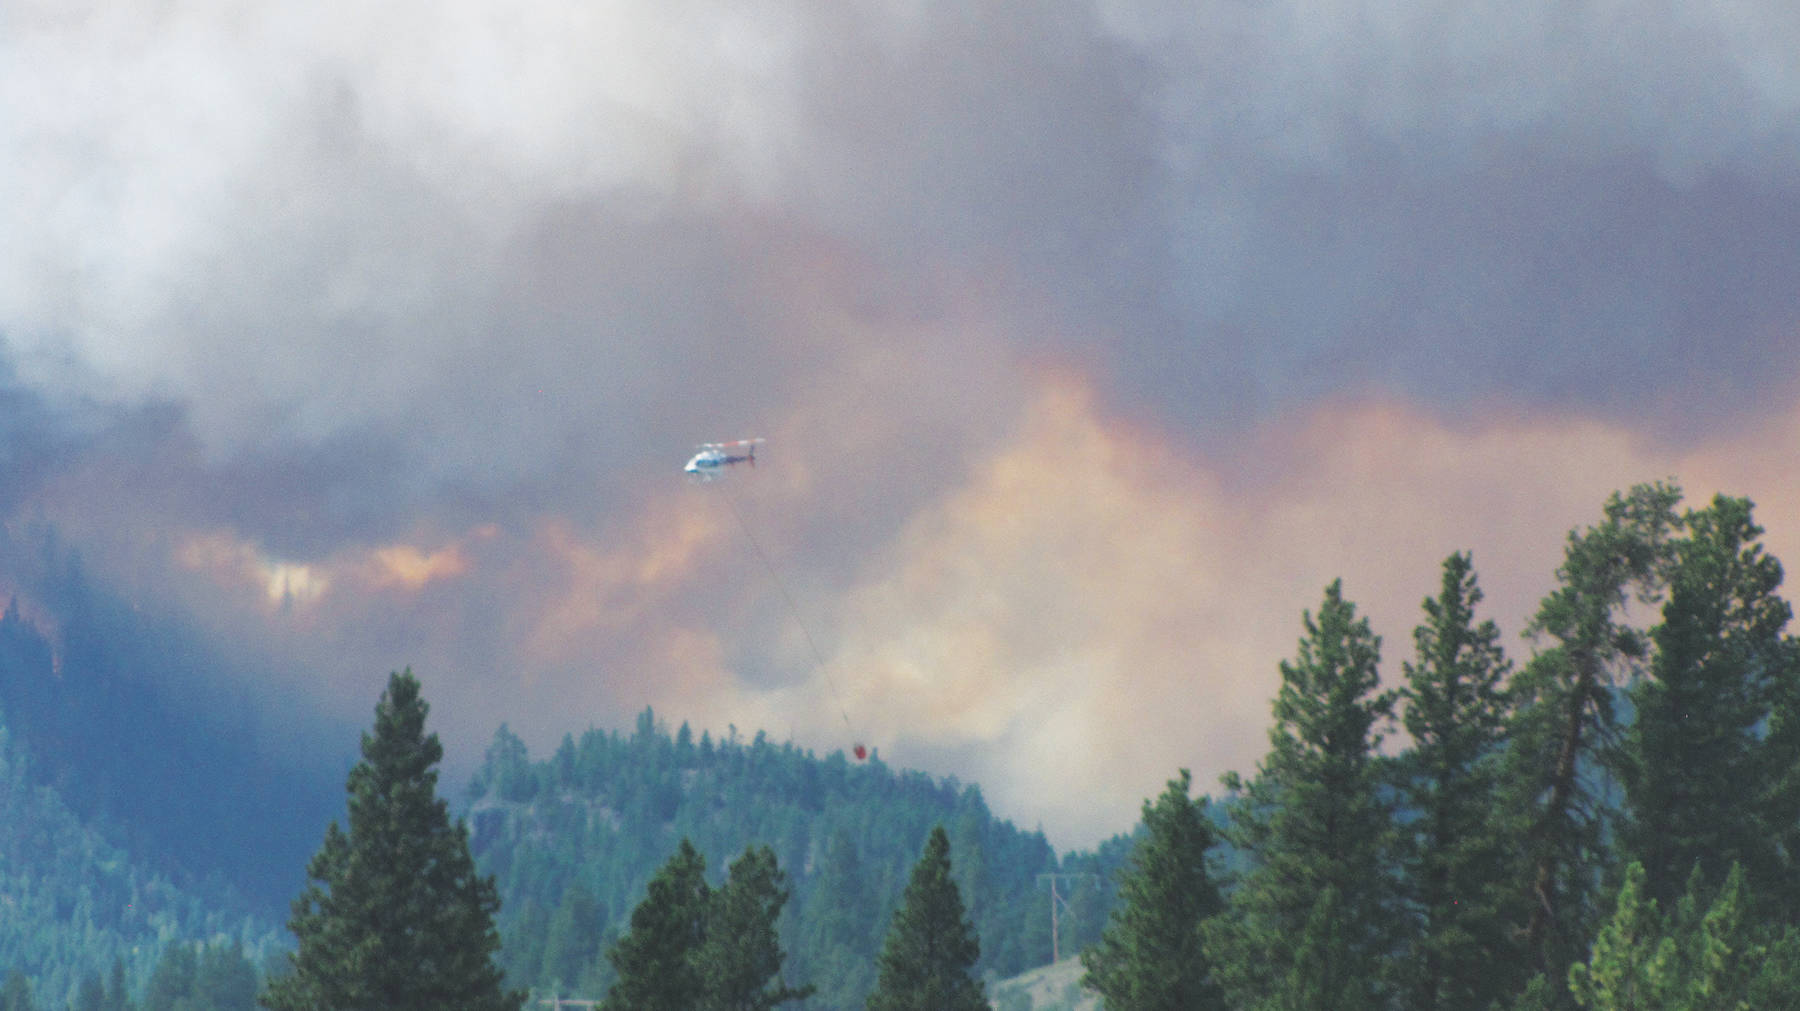 UPDATE: Princeton fire holds at 1,500 hectares